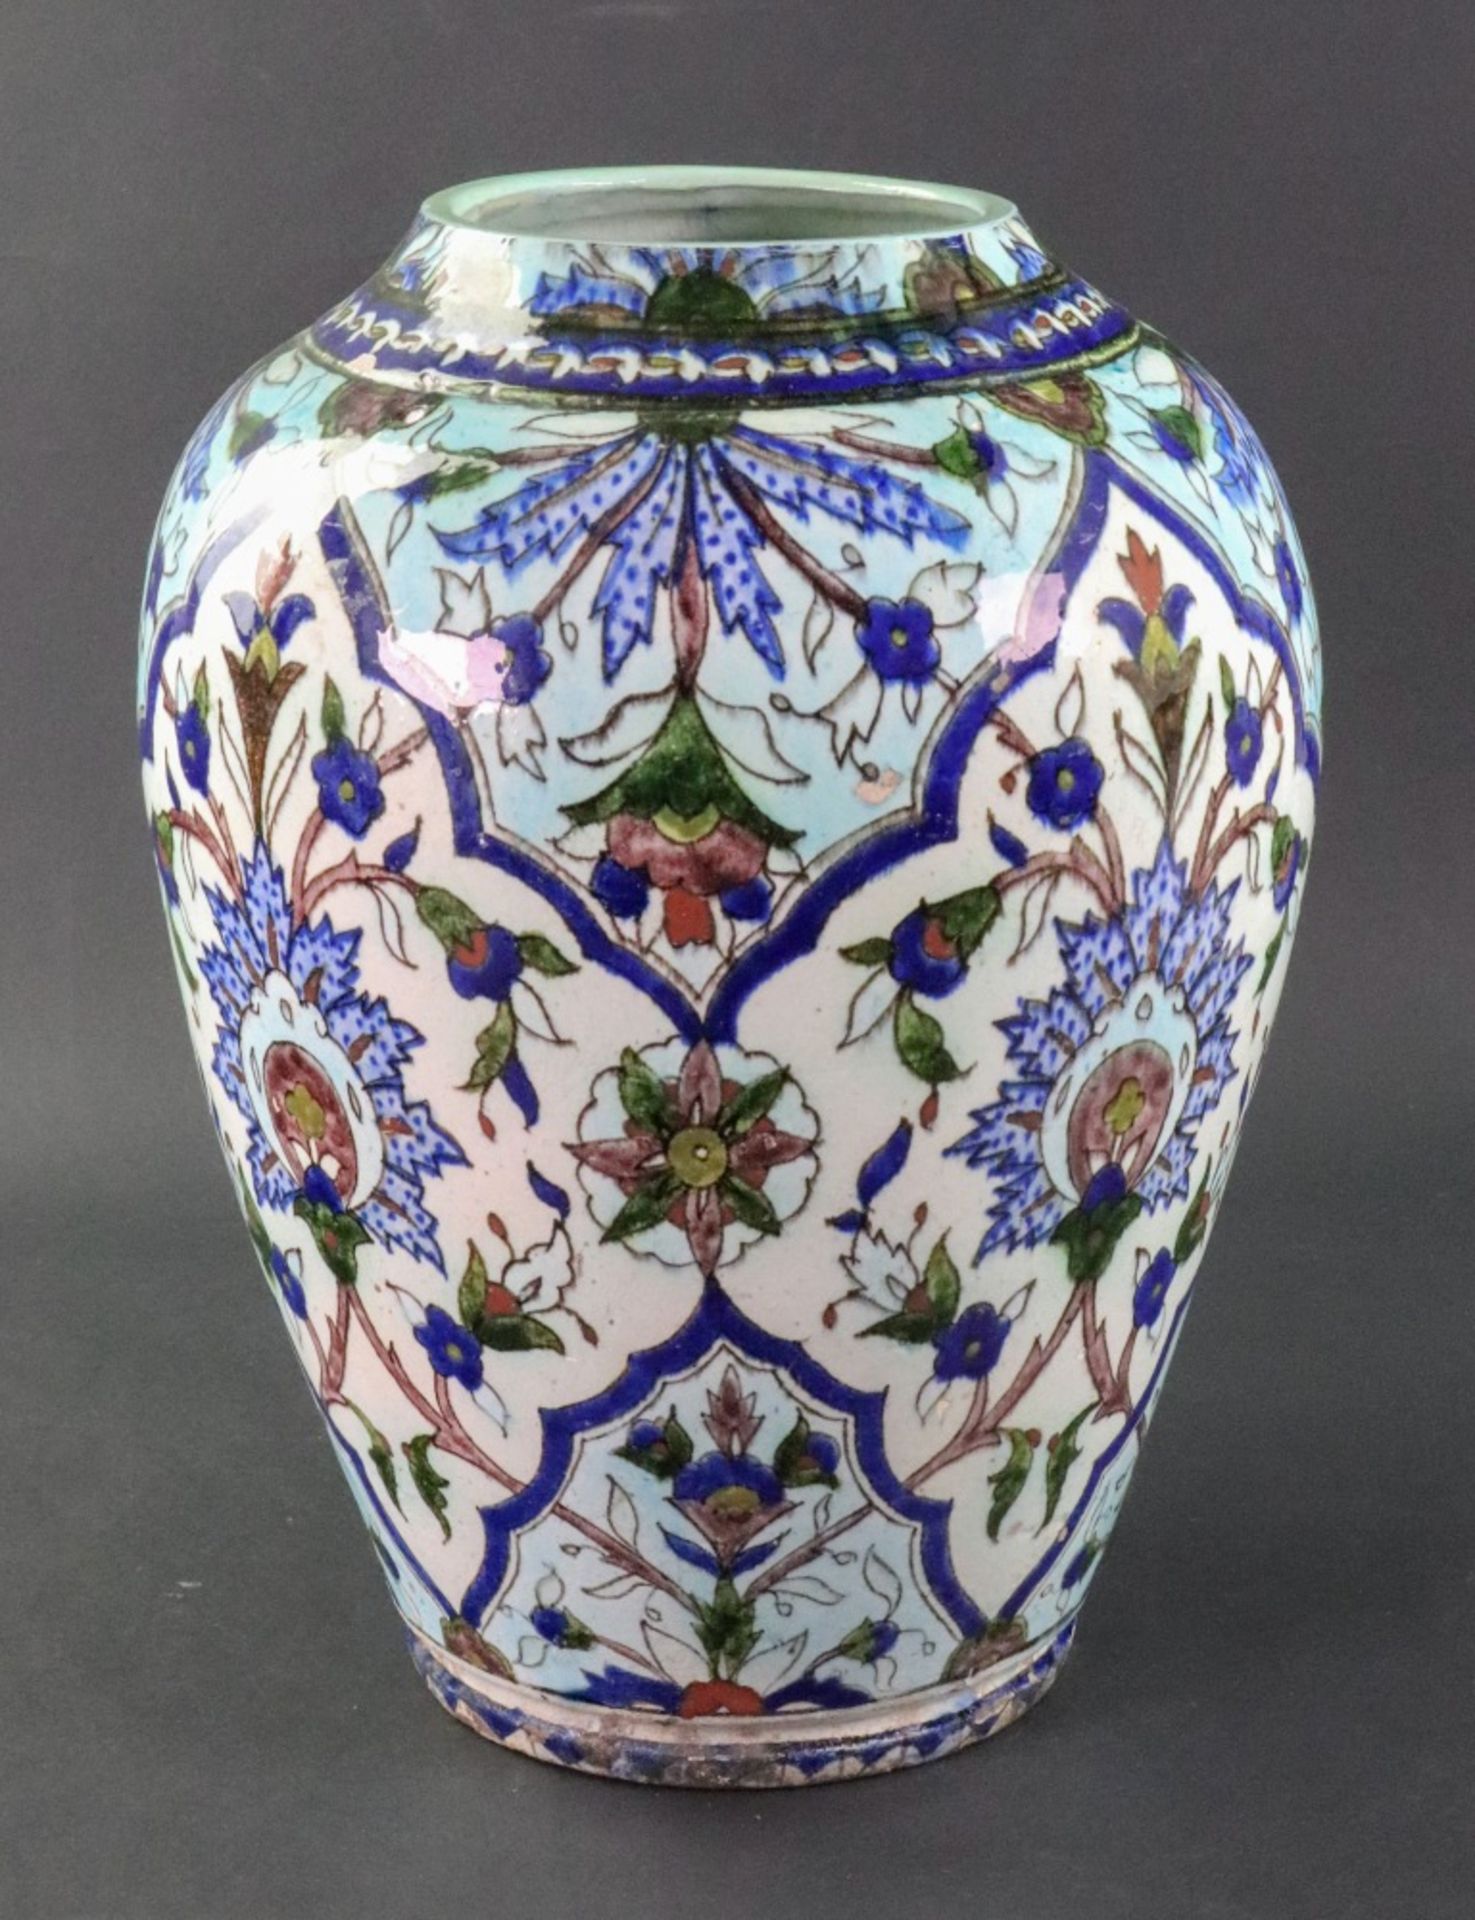 A Iznik style earthenware vase, late 19th/early 20th century,